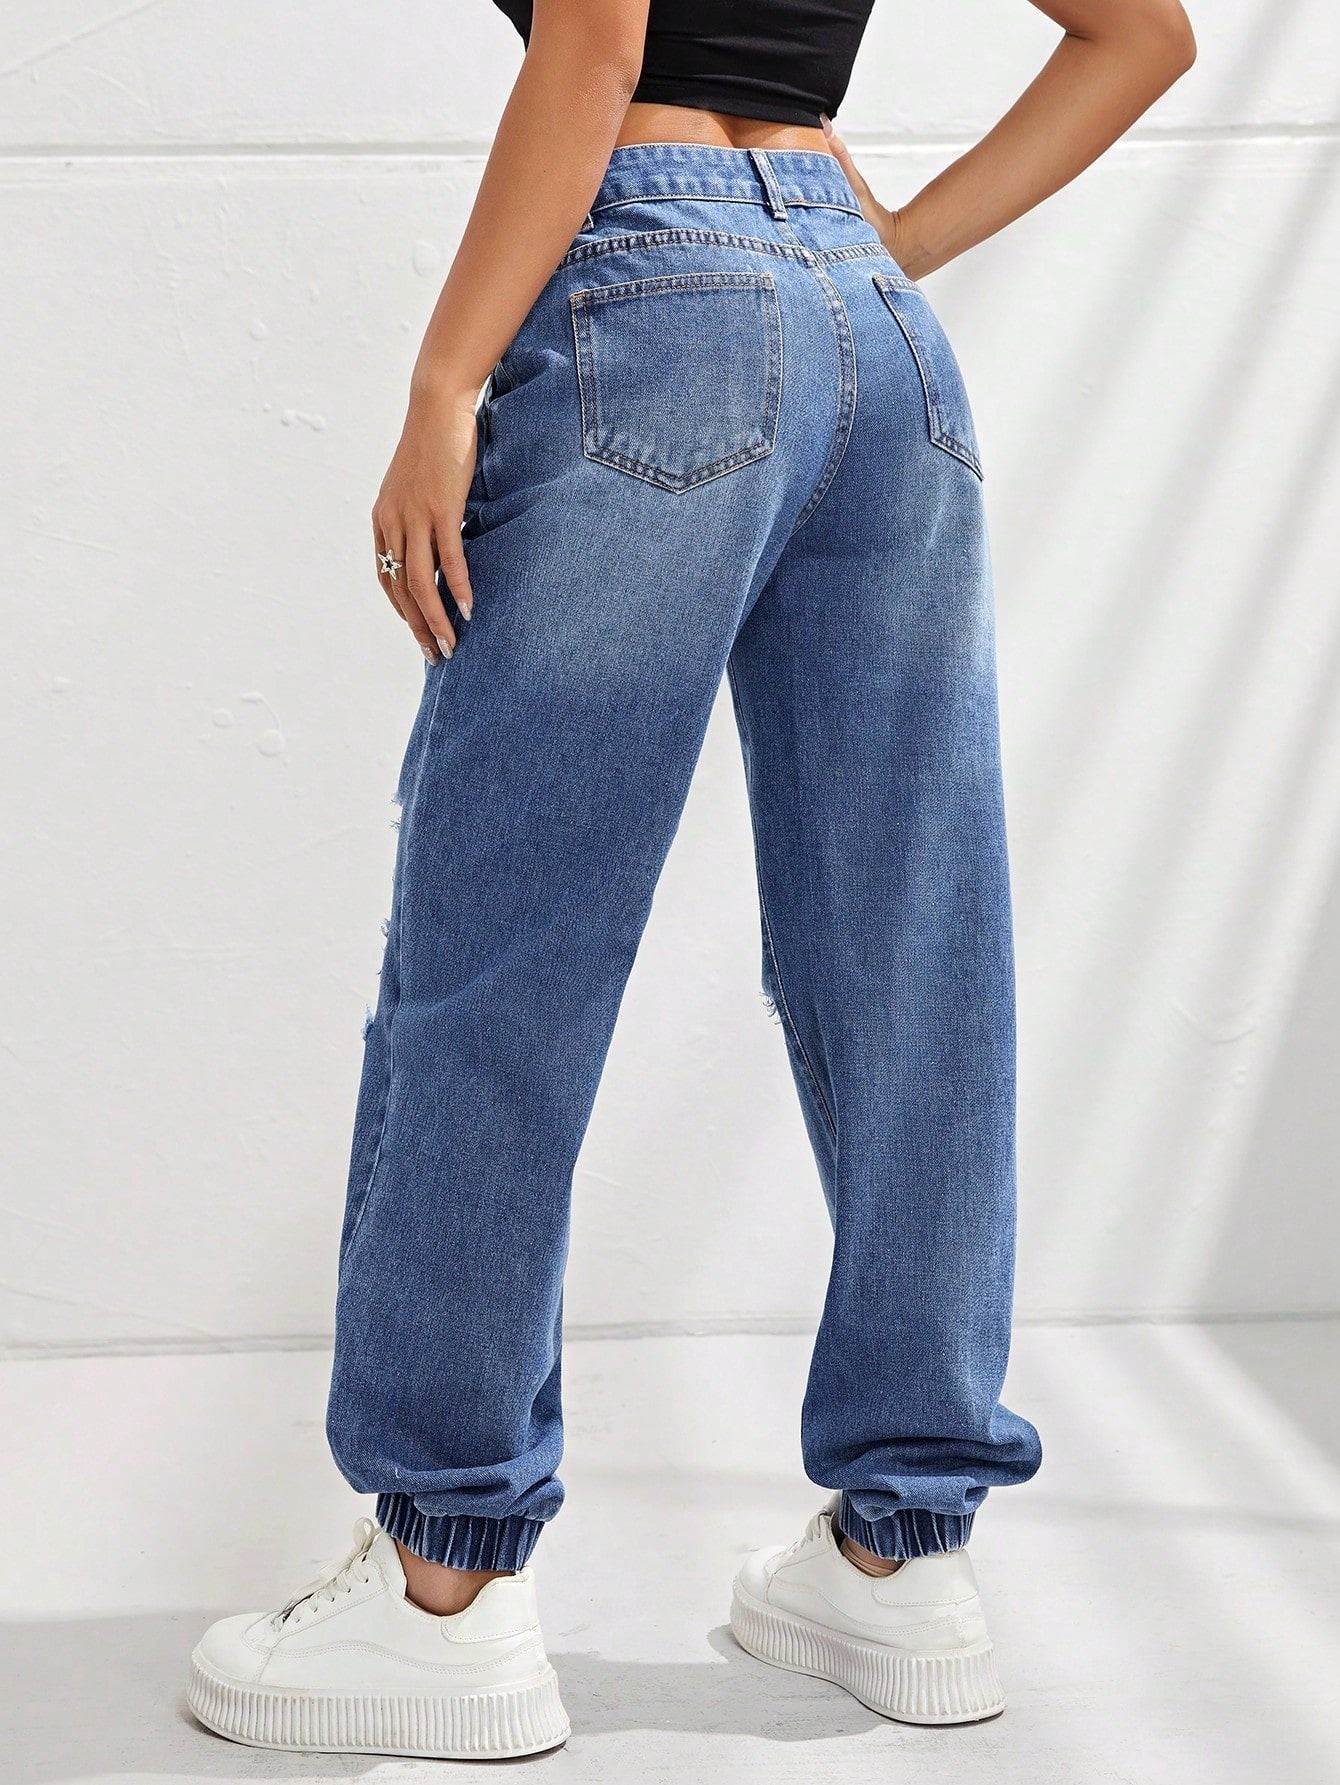 Women Clothing High Waist Slimming Holes Ankle Tied Jeans